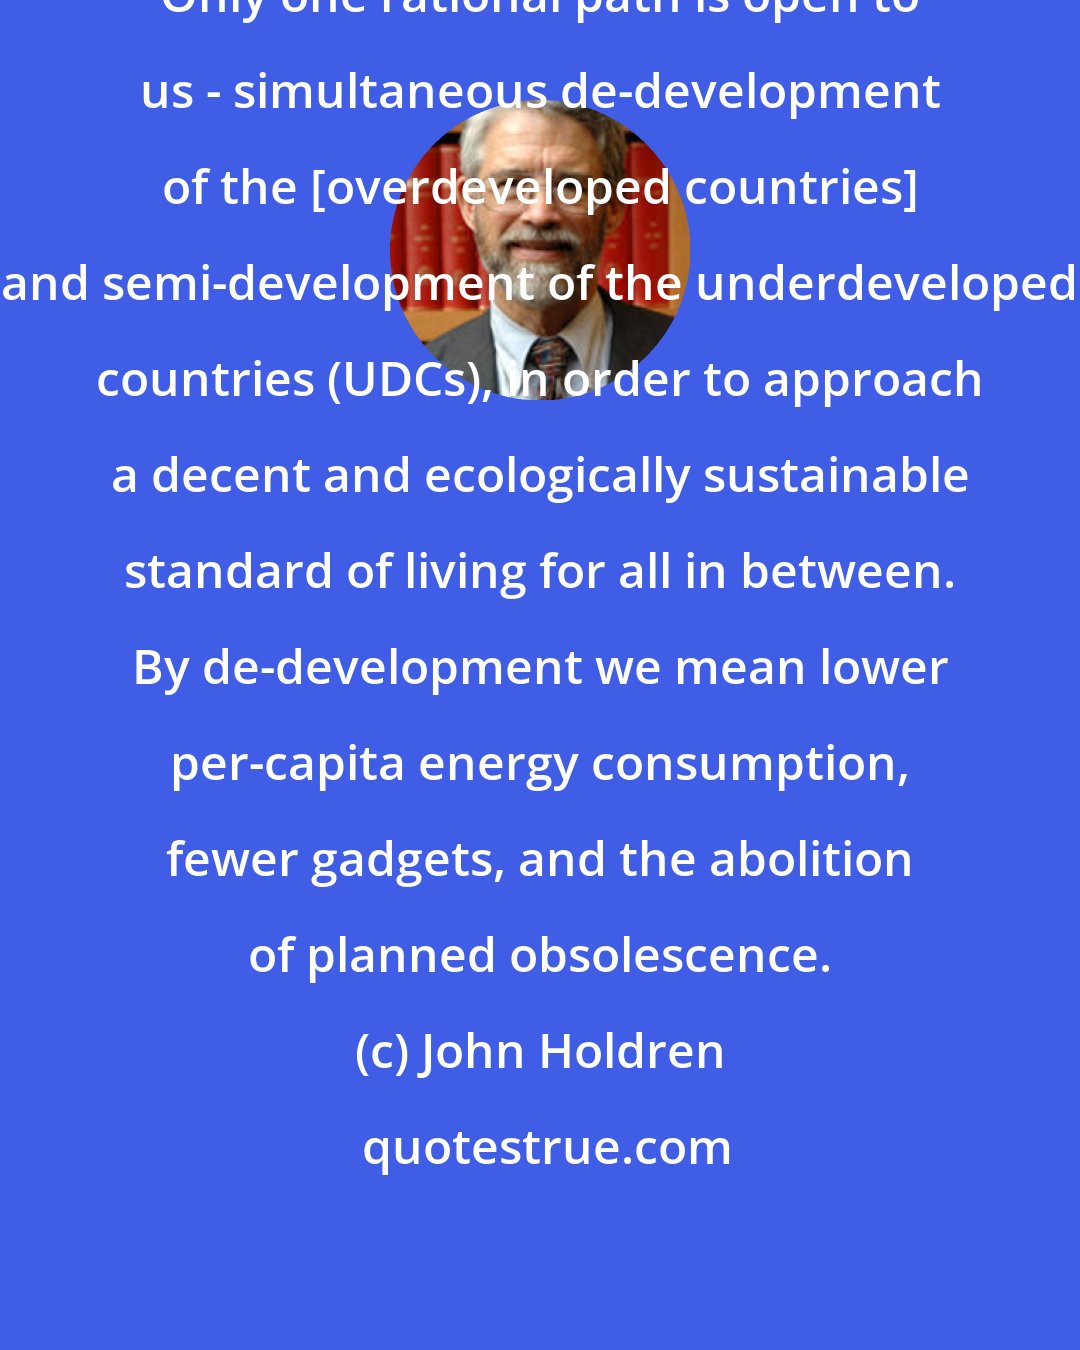 John Holdren: Only one rational path is open to us - simultaneous de-development of the [overdeveloped countries] and semi-development of the underdeveloped countries (UDCs), in order to approach a decent and ecologically sustainable standard of living for all in between. By de-development we mean lower per-capita energy consumption, fewer gadgets, and the abolition of planned obsolescence.